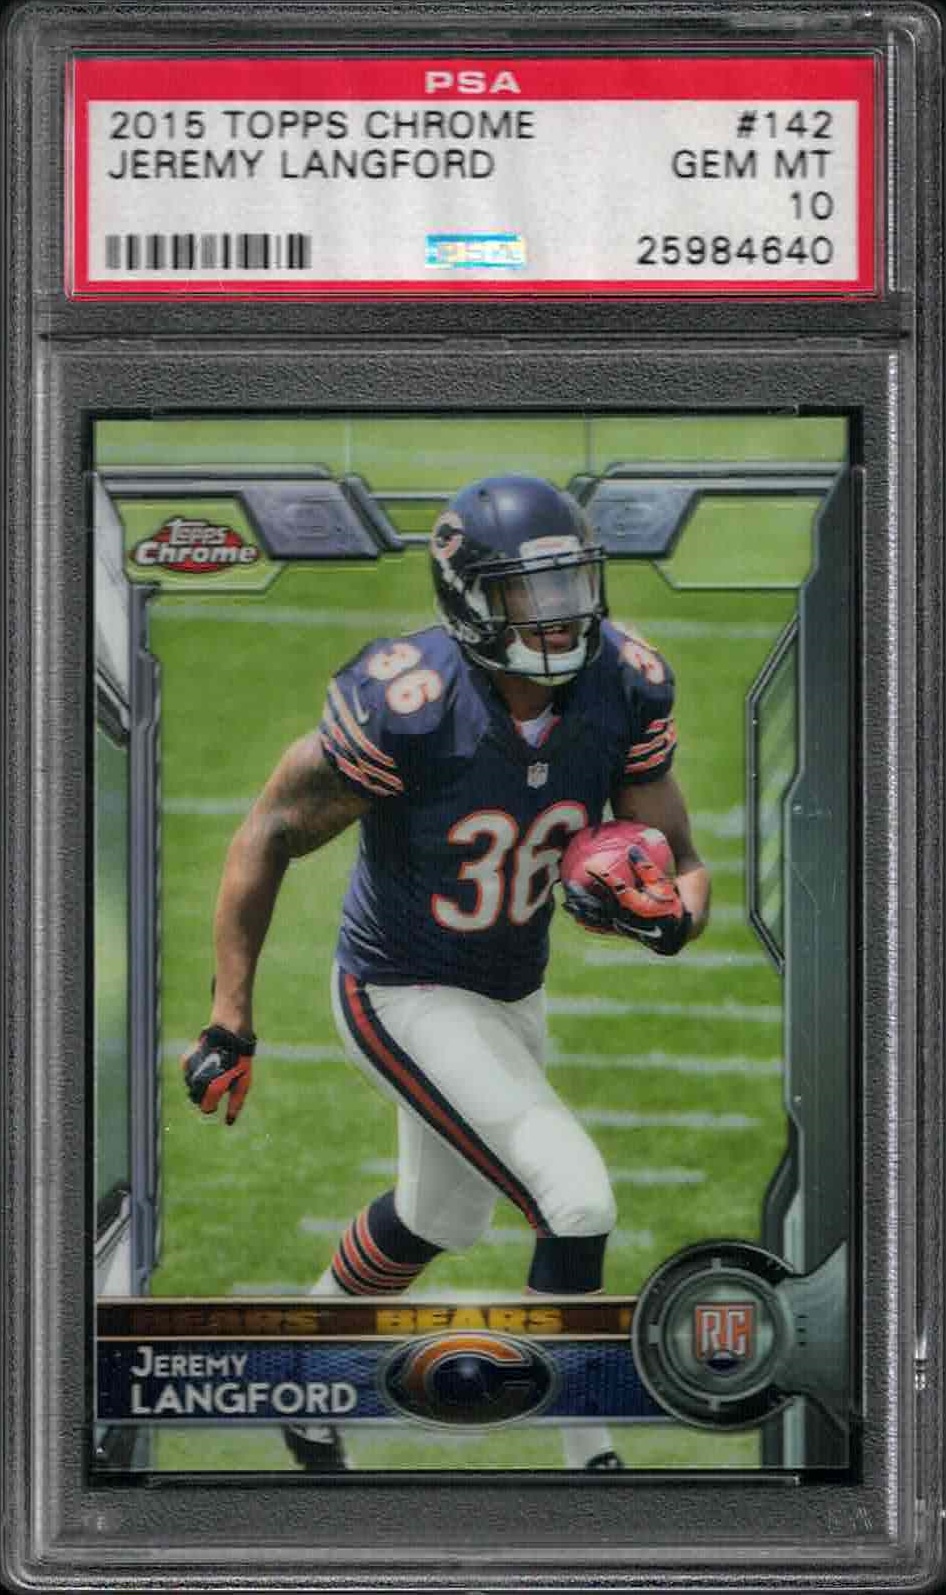 Jeremy Langford in 2015 Topps Chrome card #142, graded GEM MT 10 by PSA.